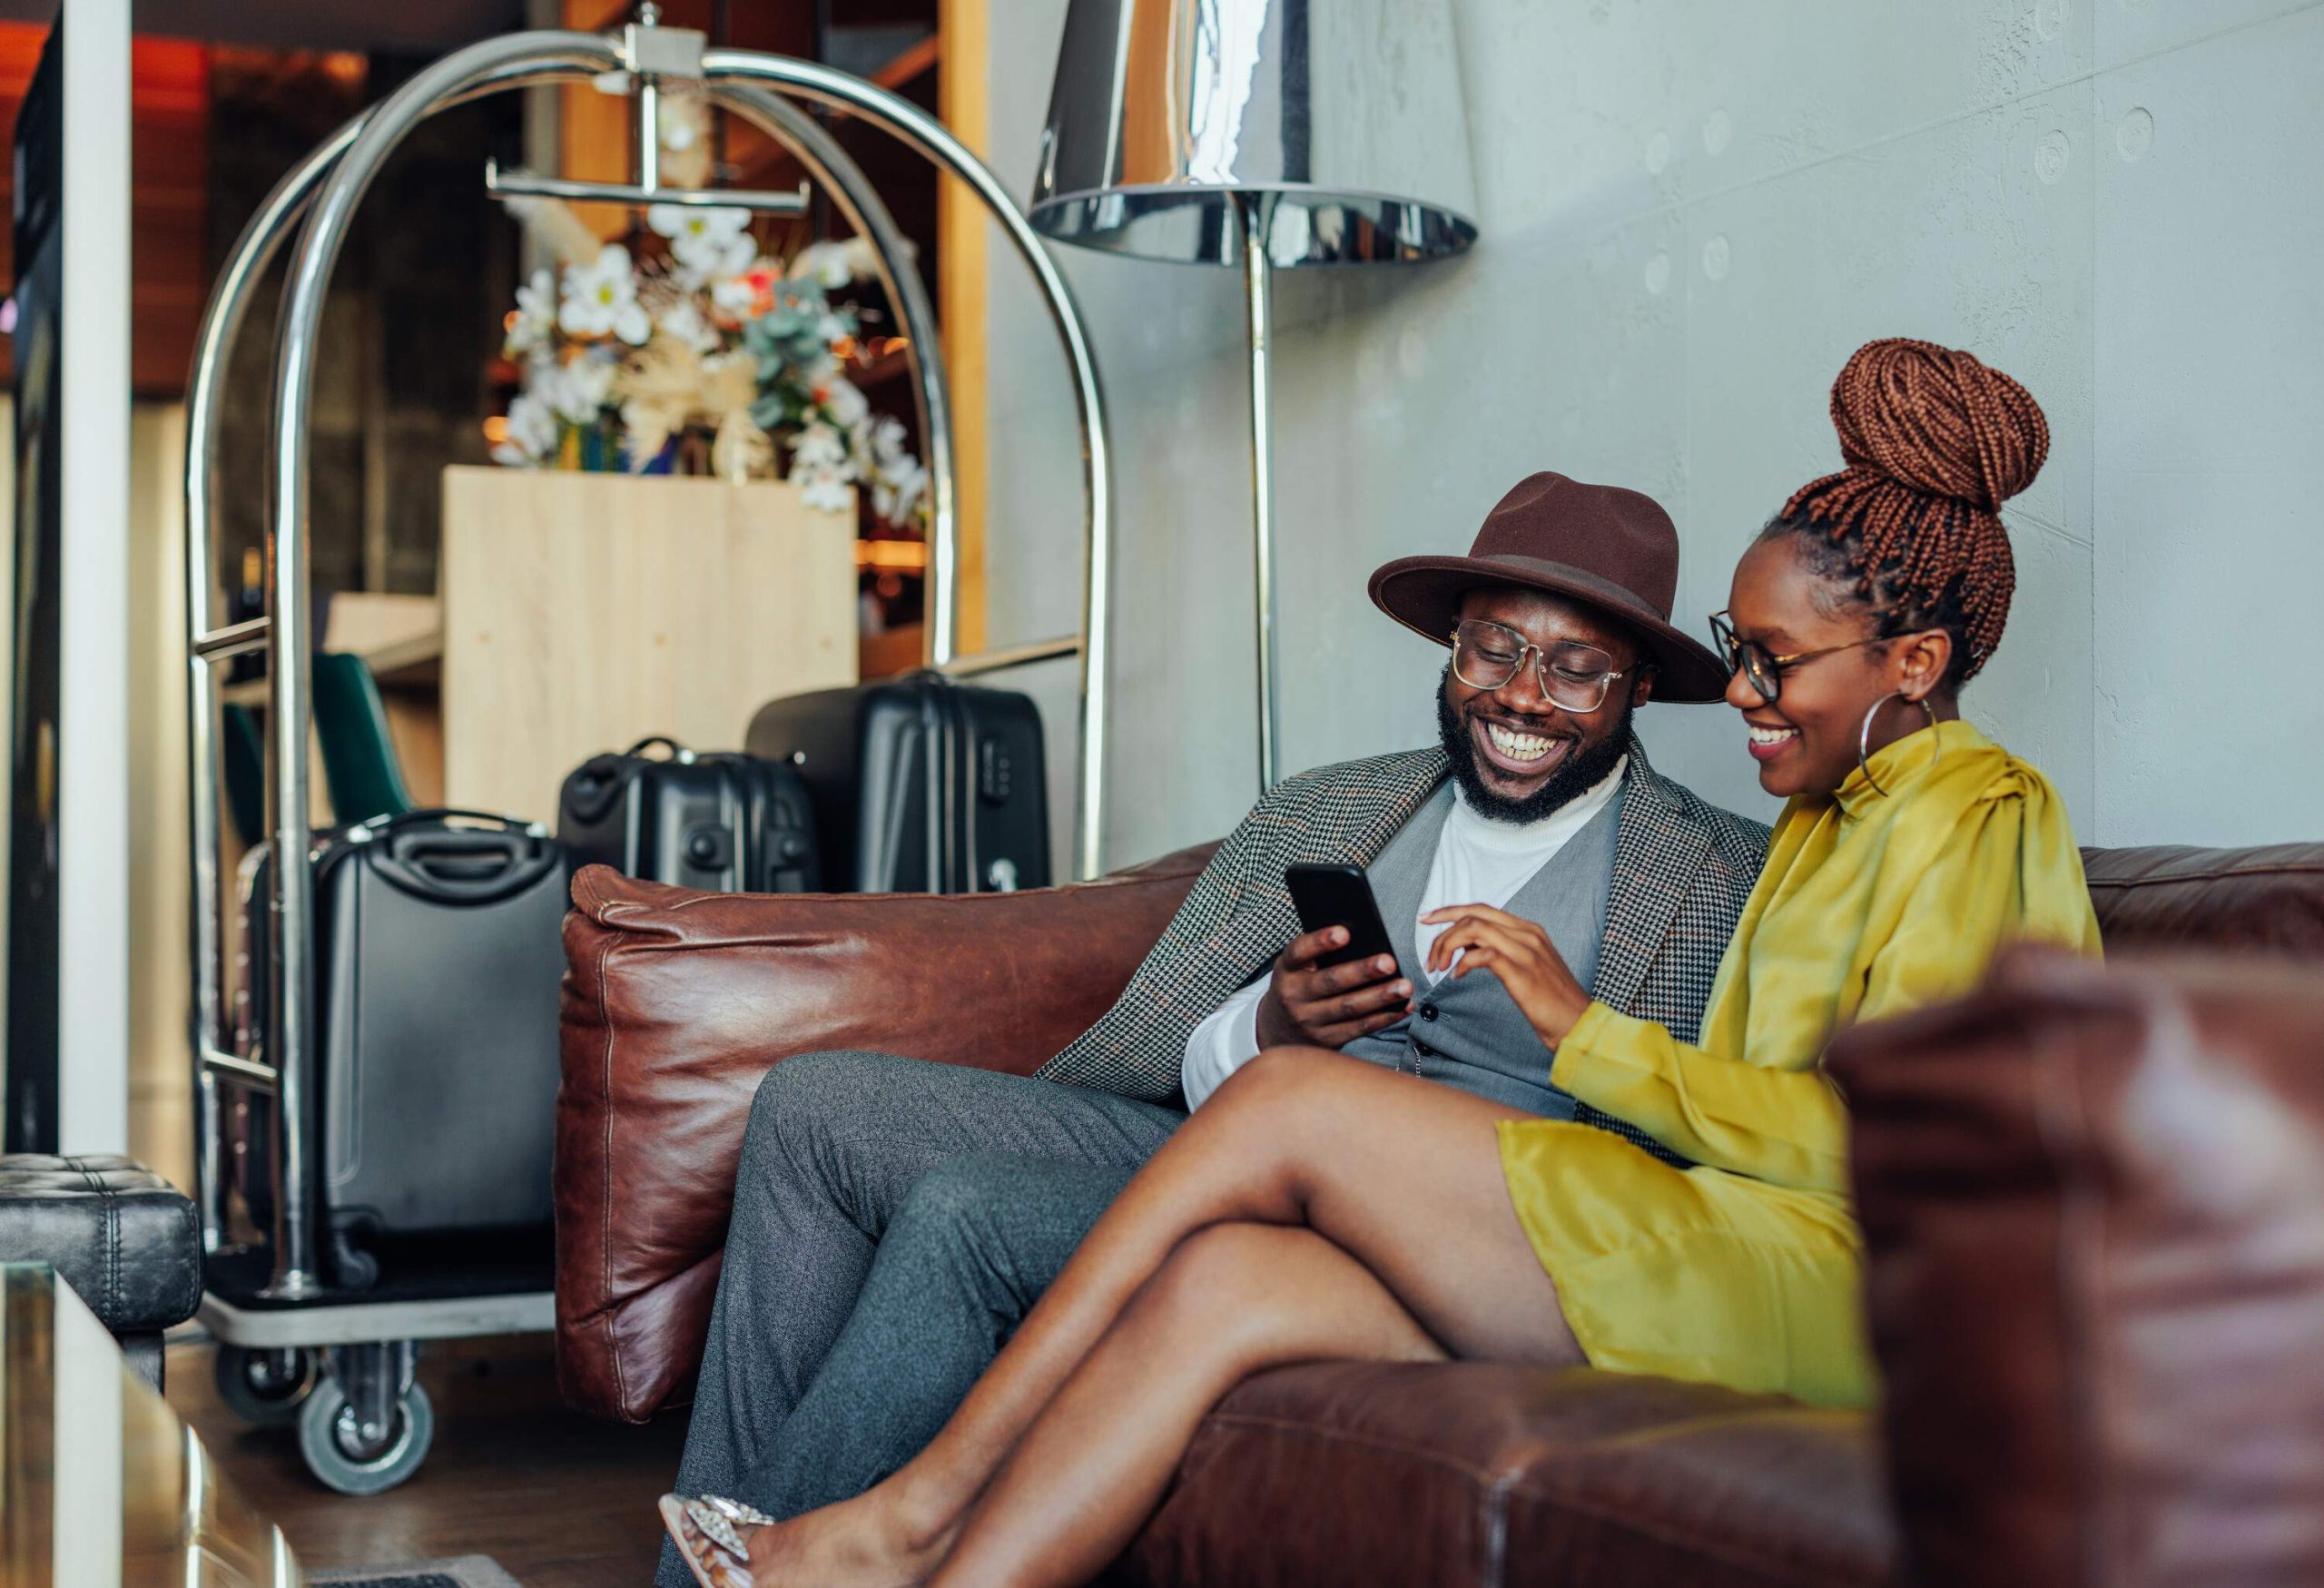 Couple sitting on a sofa in hotel lobby with their luggage on the cart, using a smartphone.